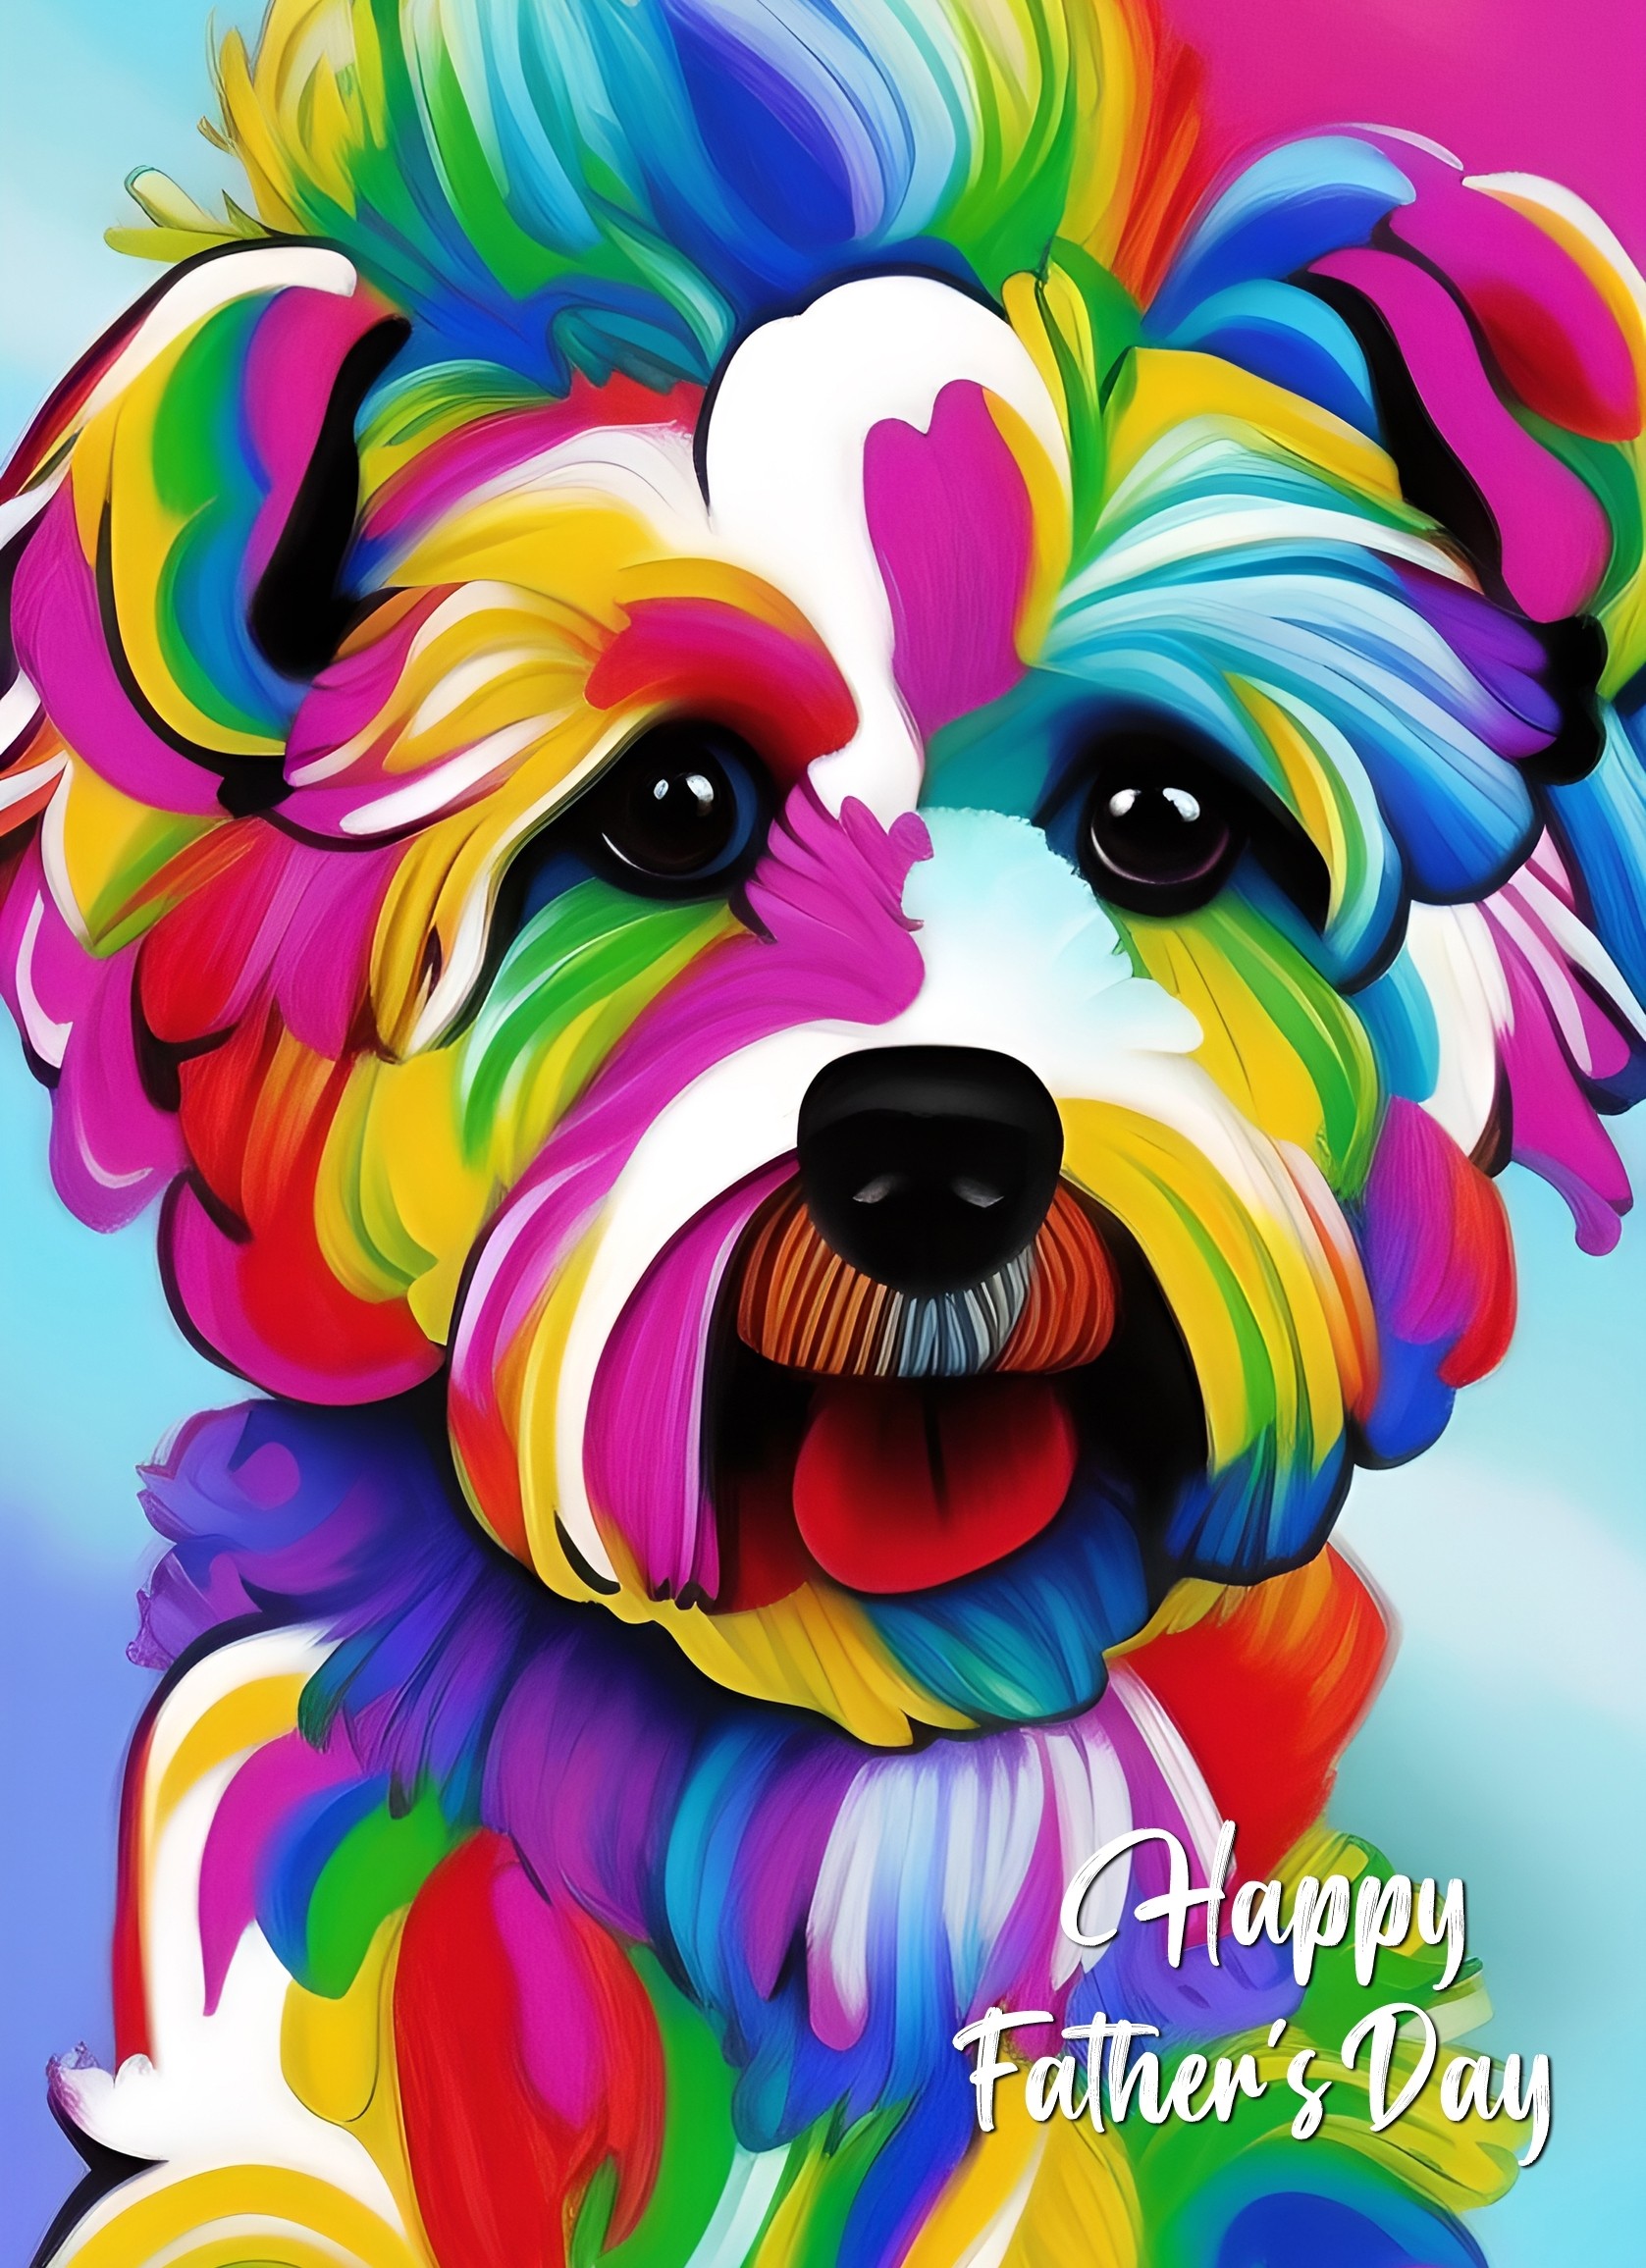 Bichon Frise Dog Colourful Abstract Art Fathers Day Card